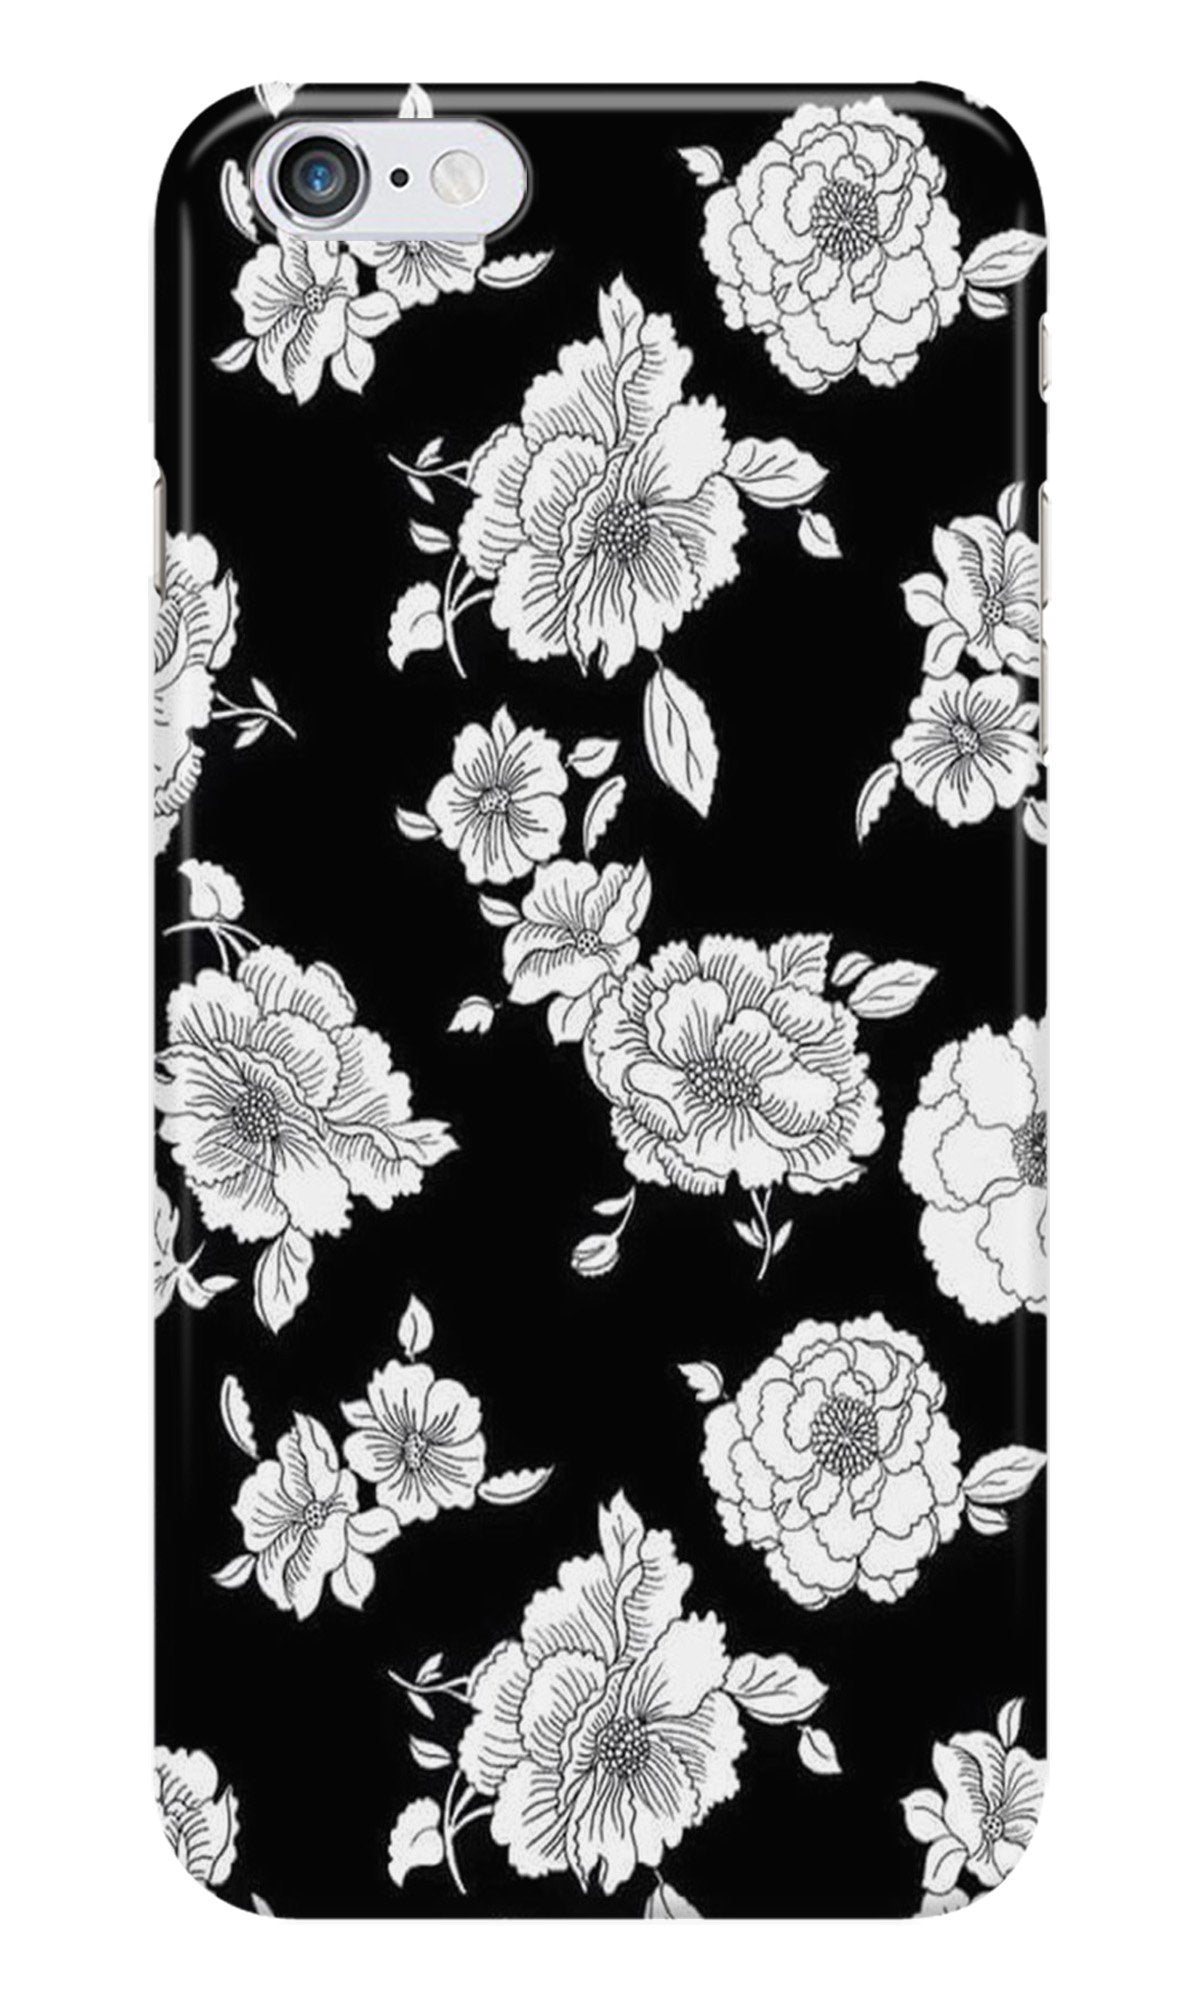 White flowers Black Background Case for iPhone 6/ 6s